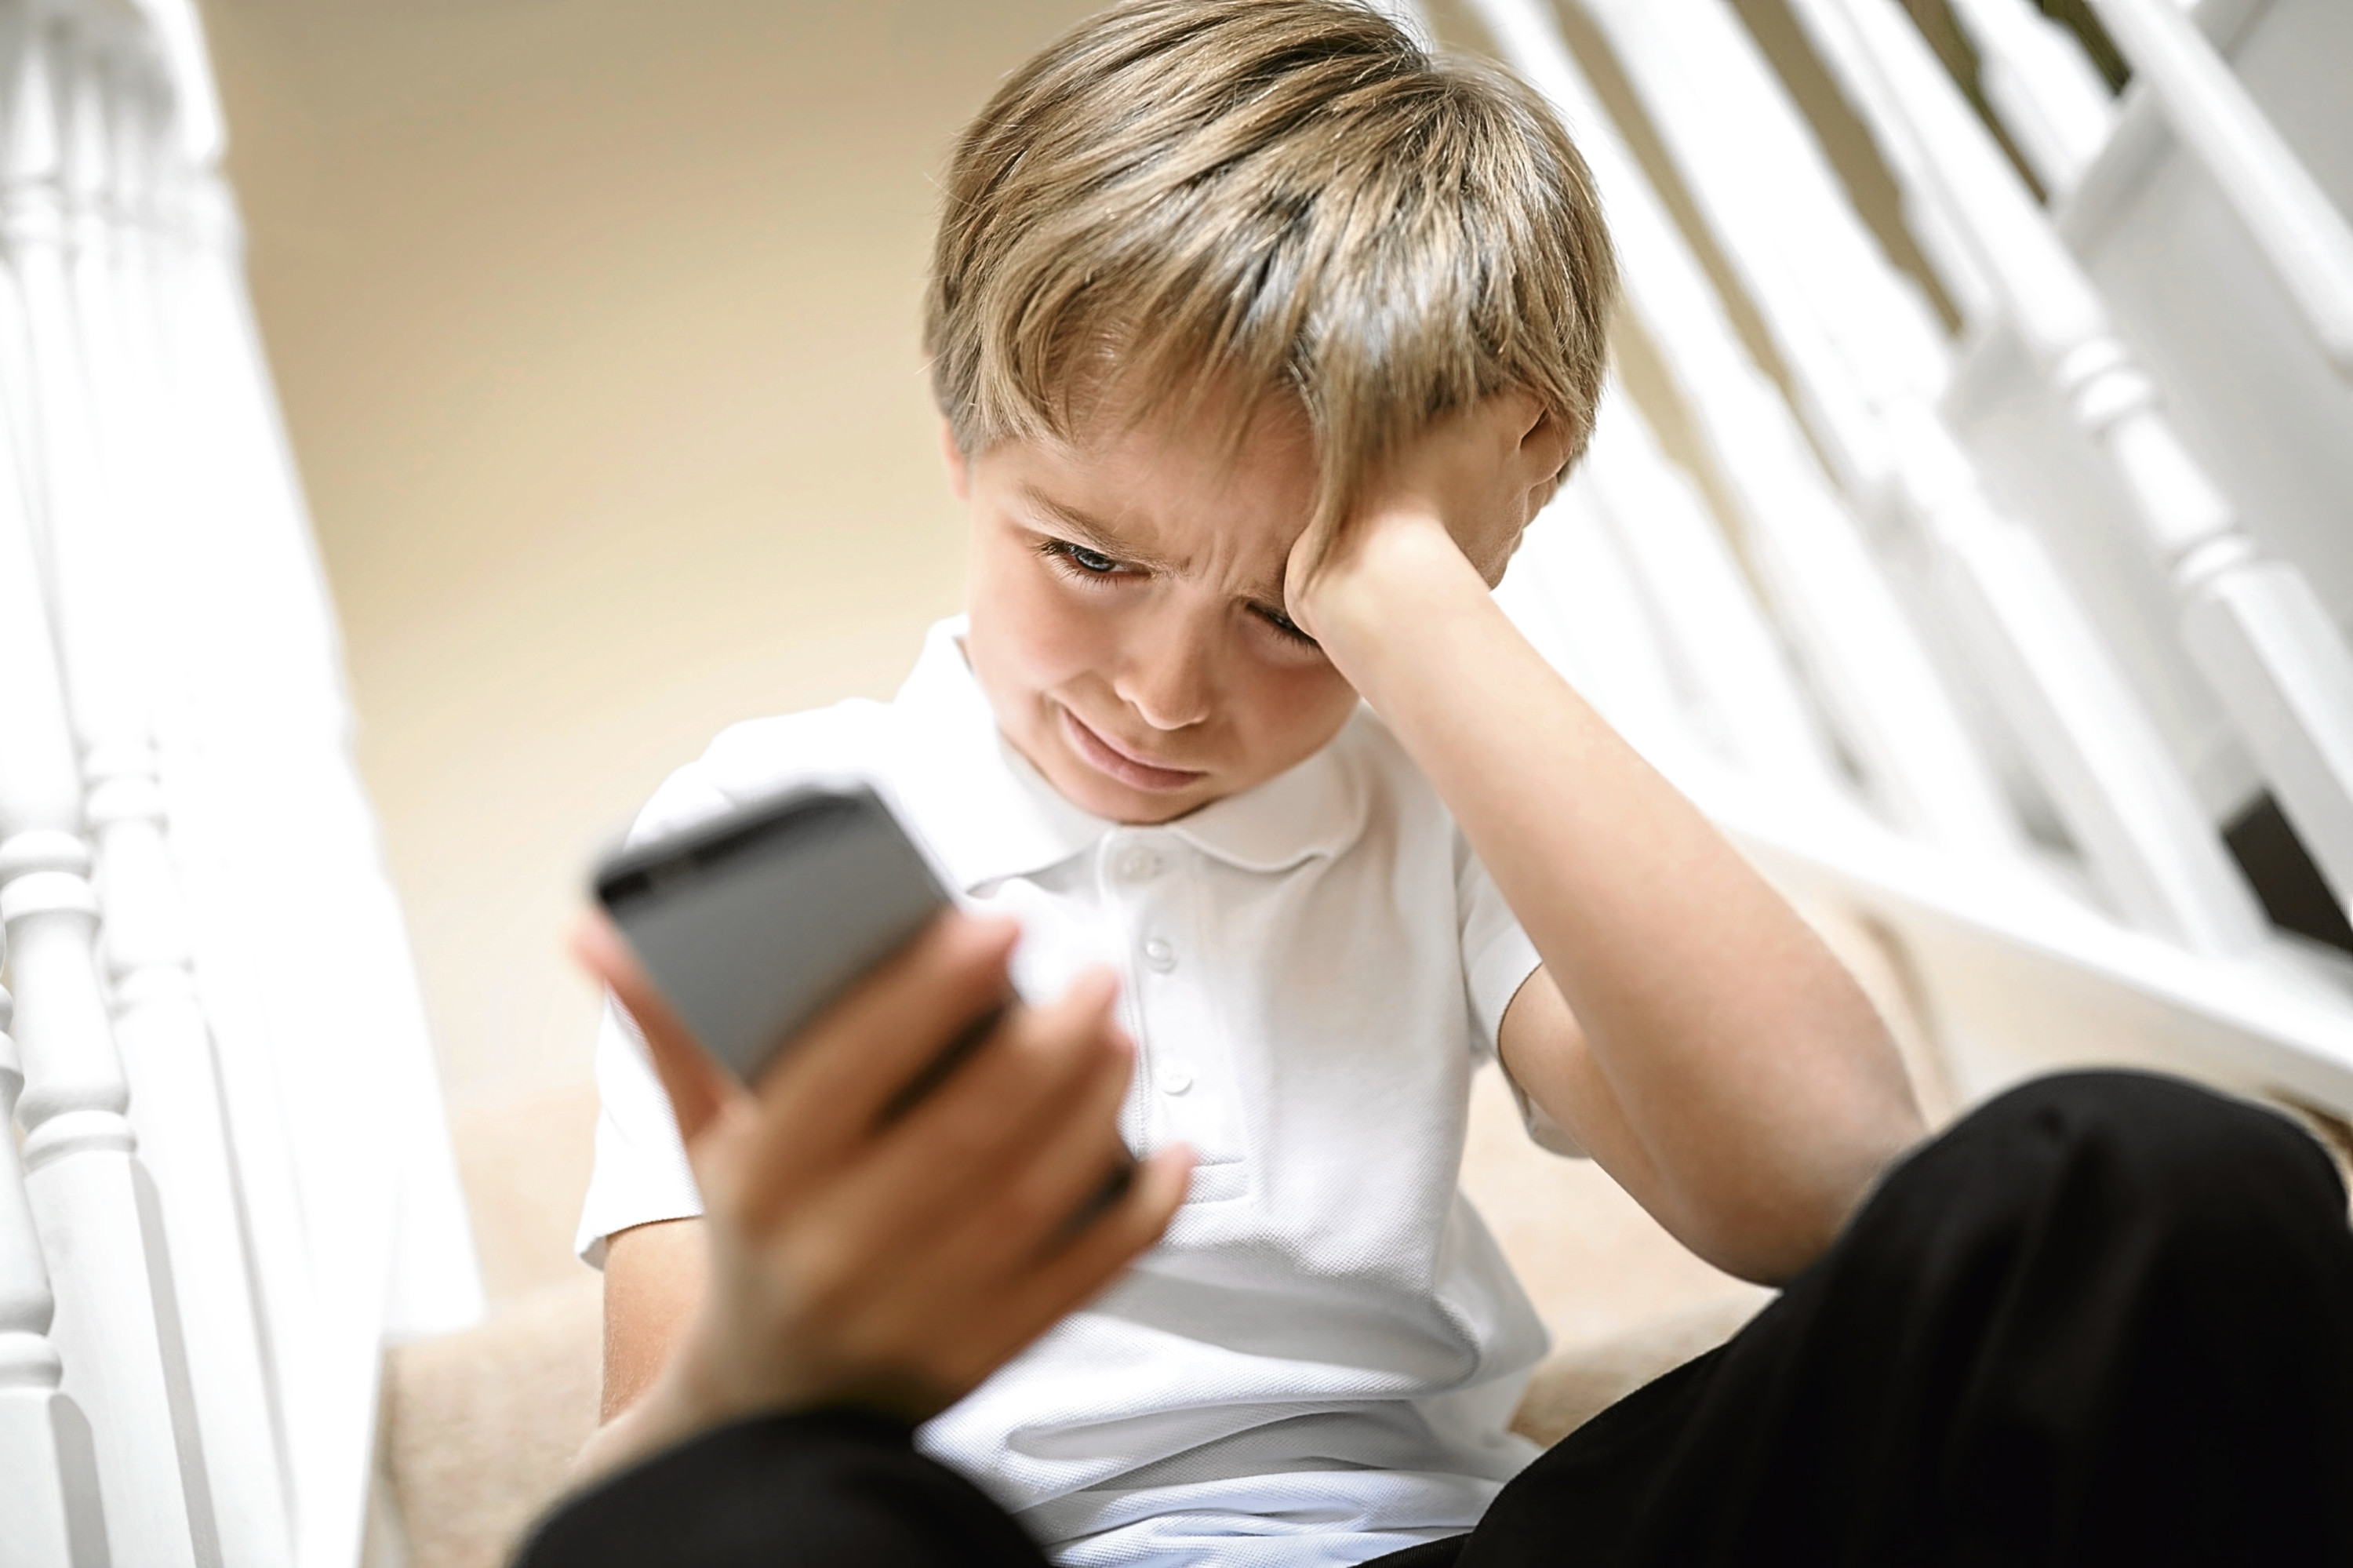 Cyber bullying by mobile cell phone text message